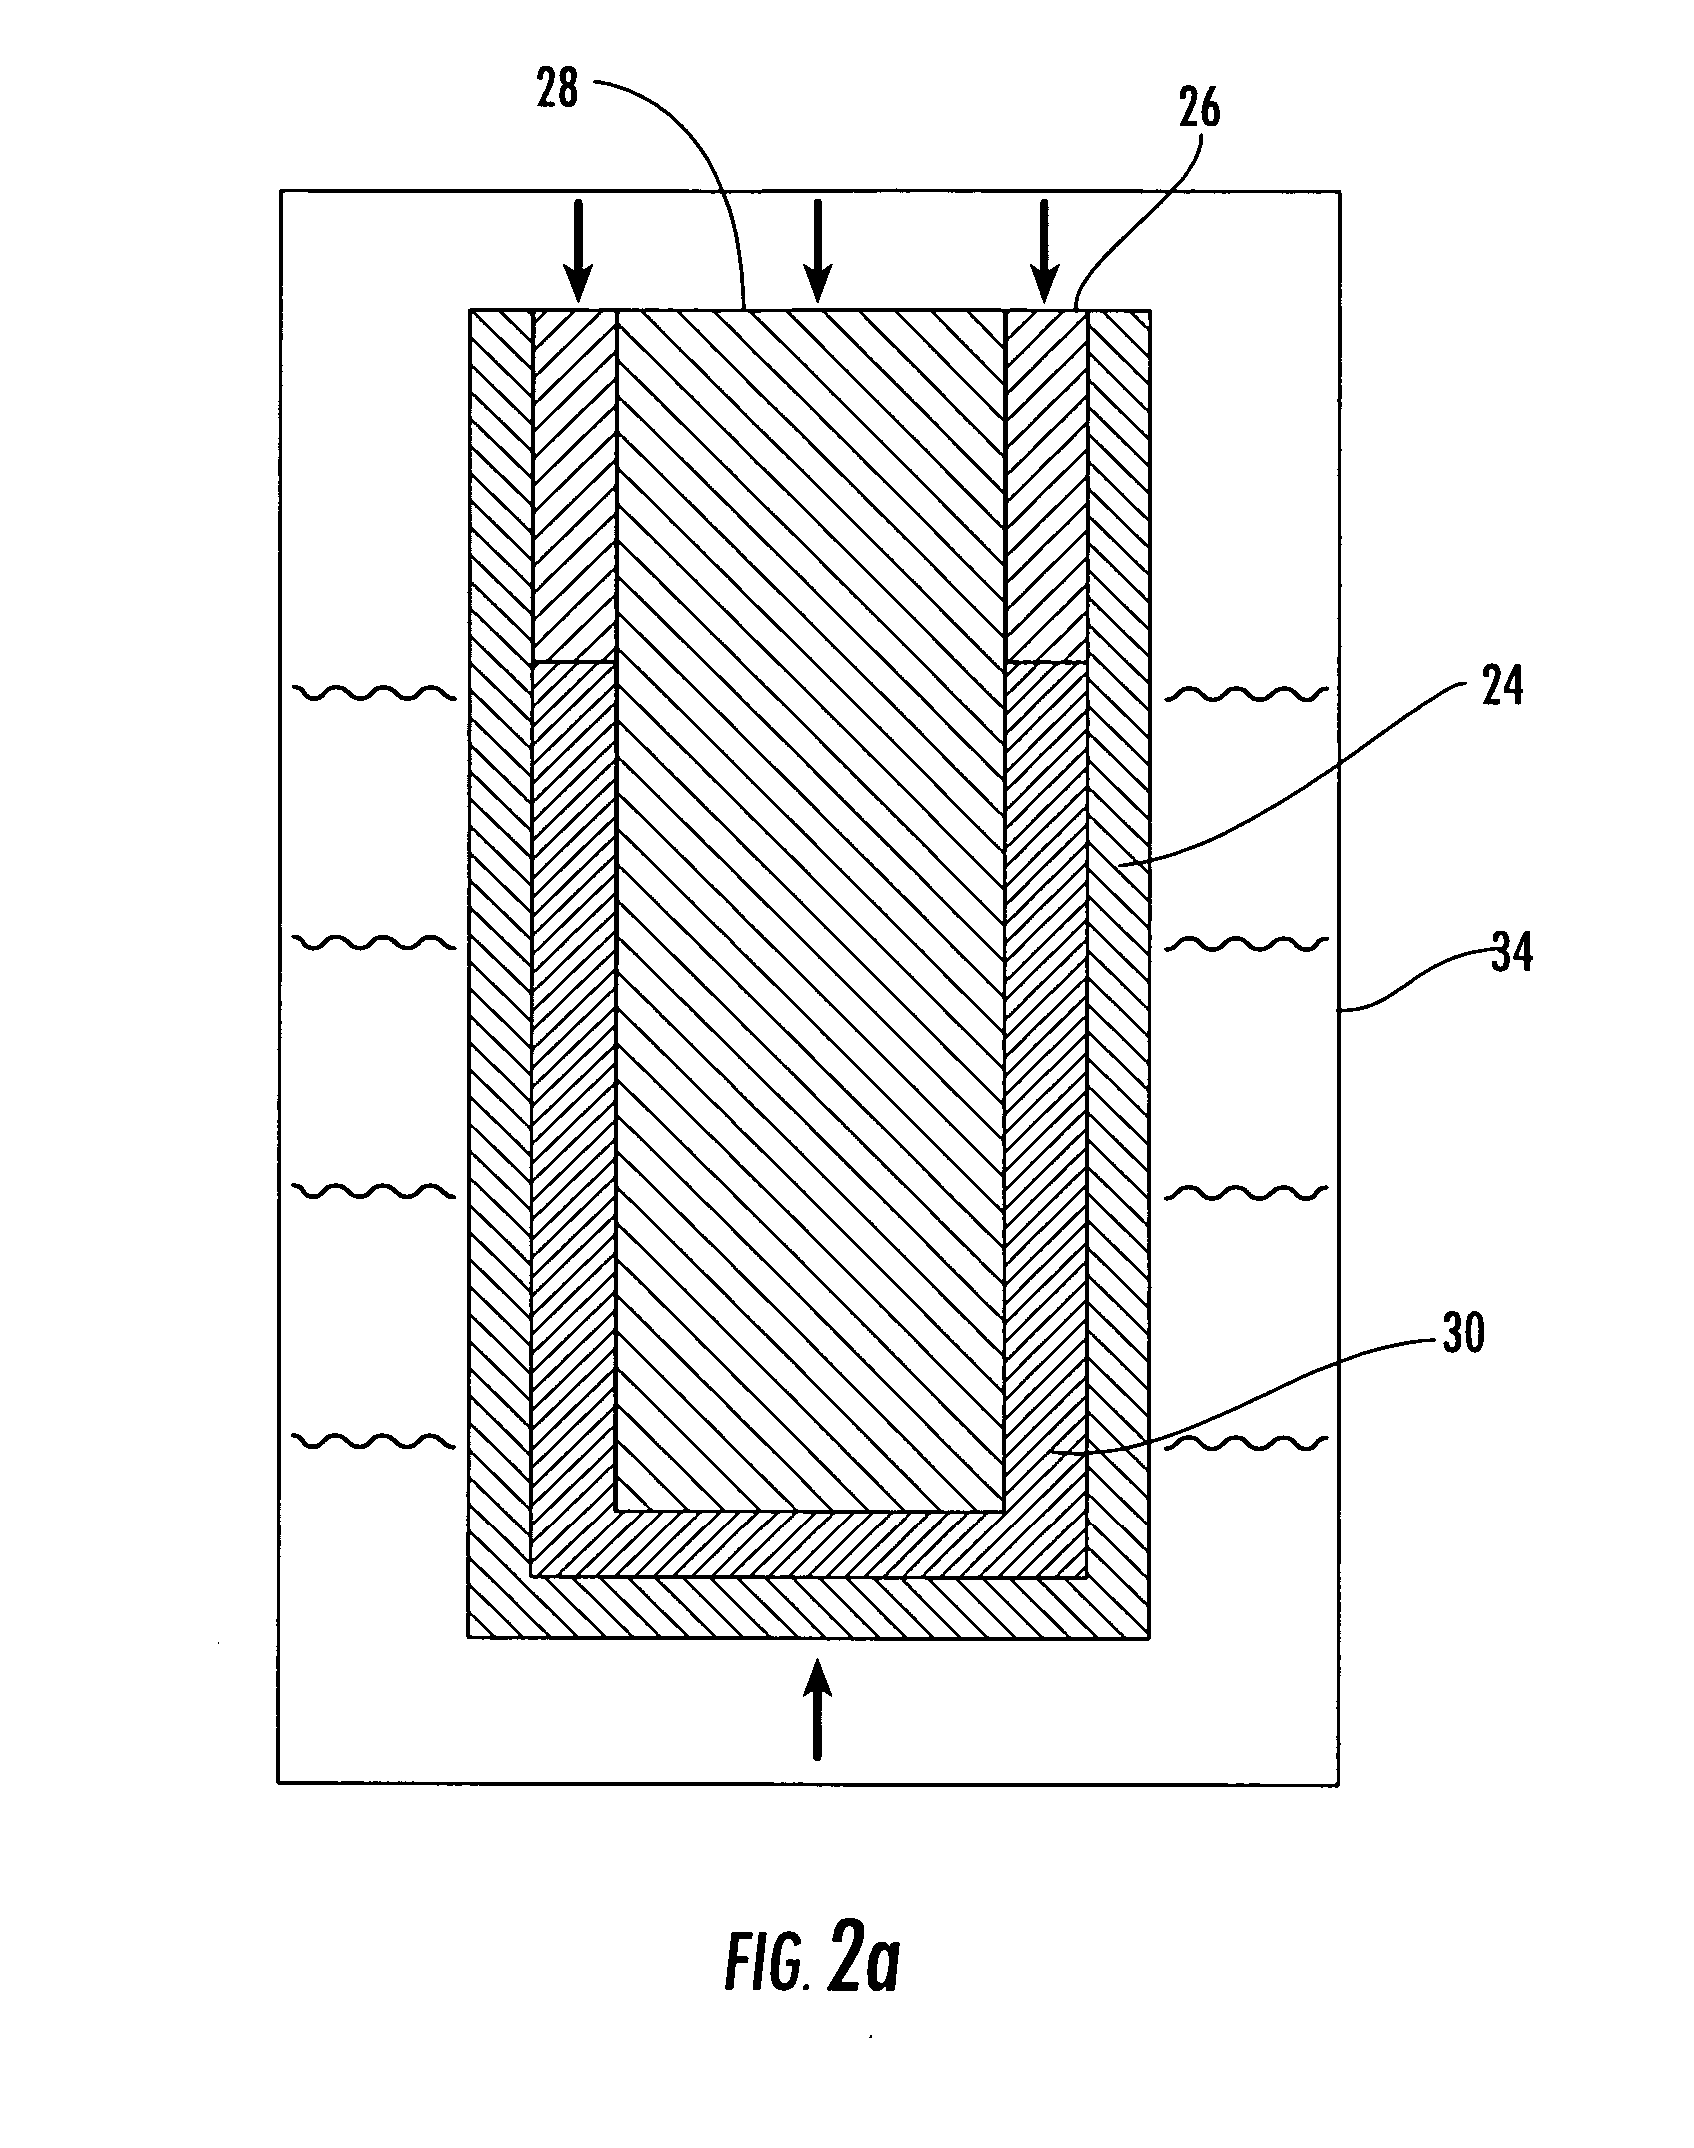 Dense, shaped articles constructed of a refractory material and methods of preparing such articles